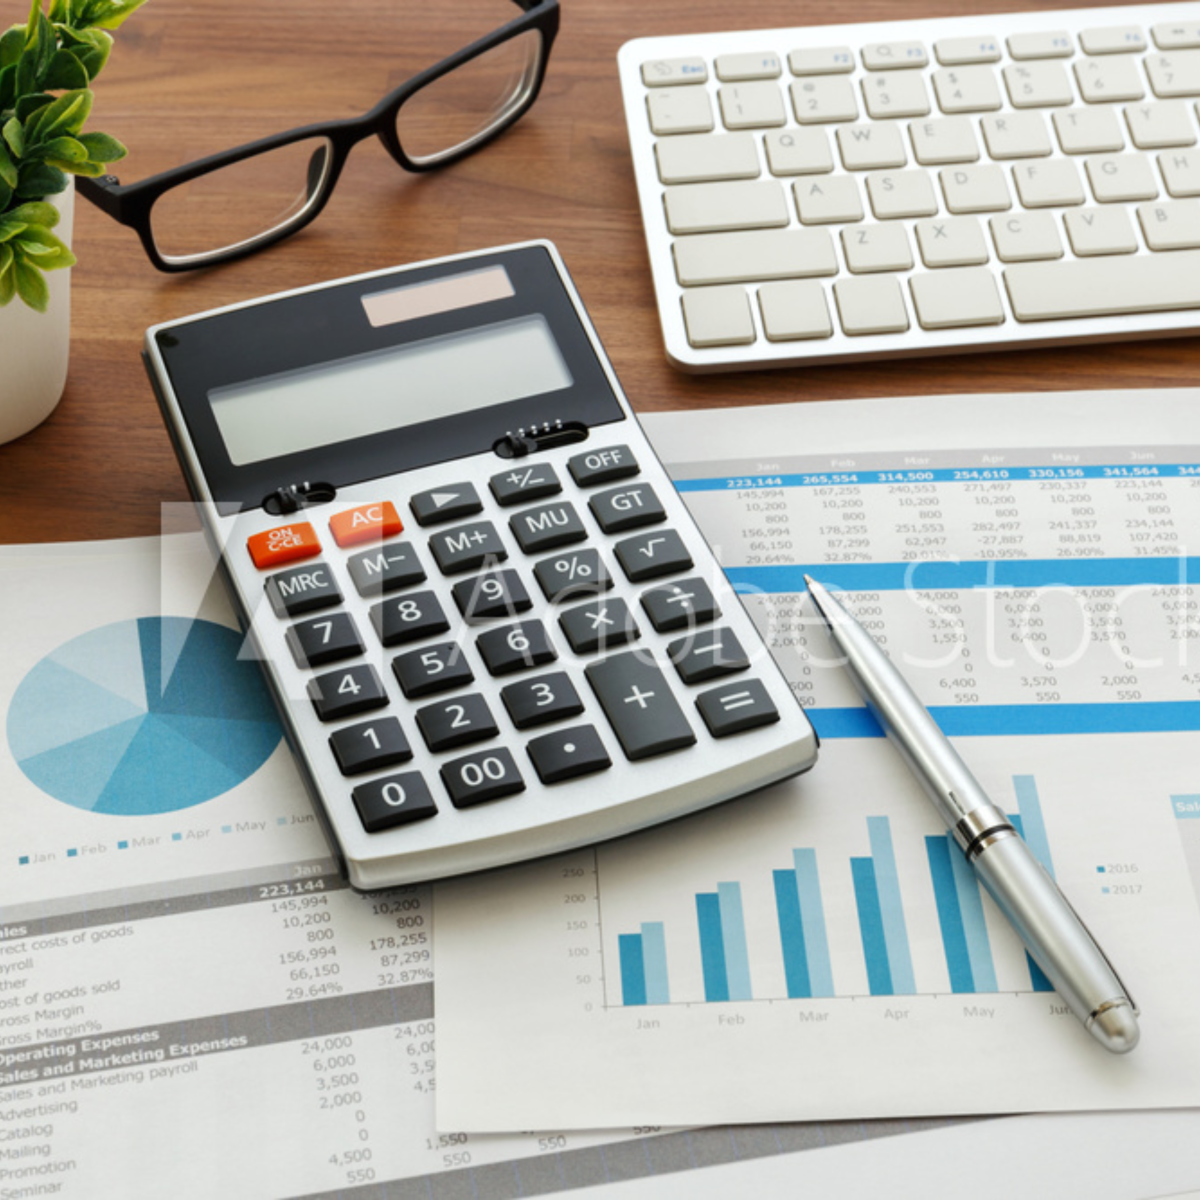 Accounting Definition, Types of Accounting, and Why Accounting is Important